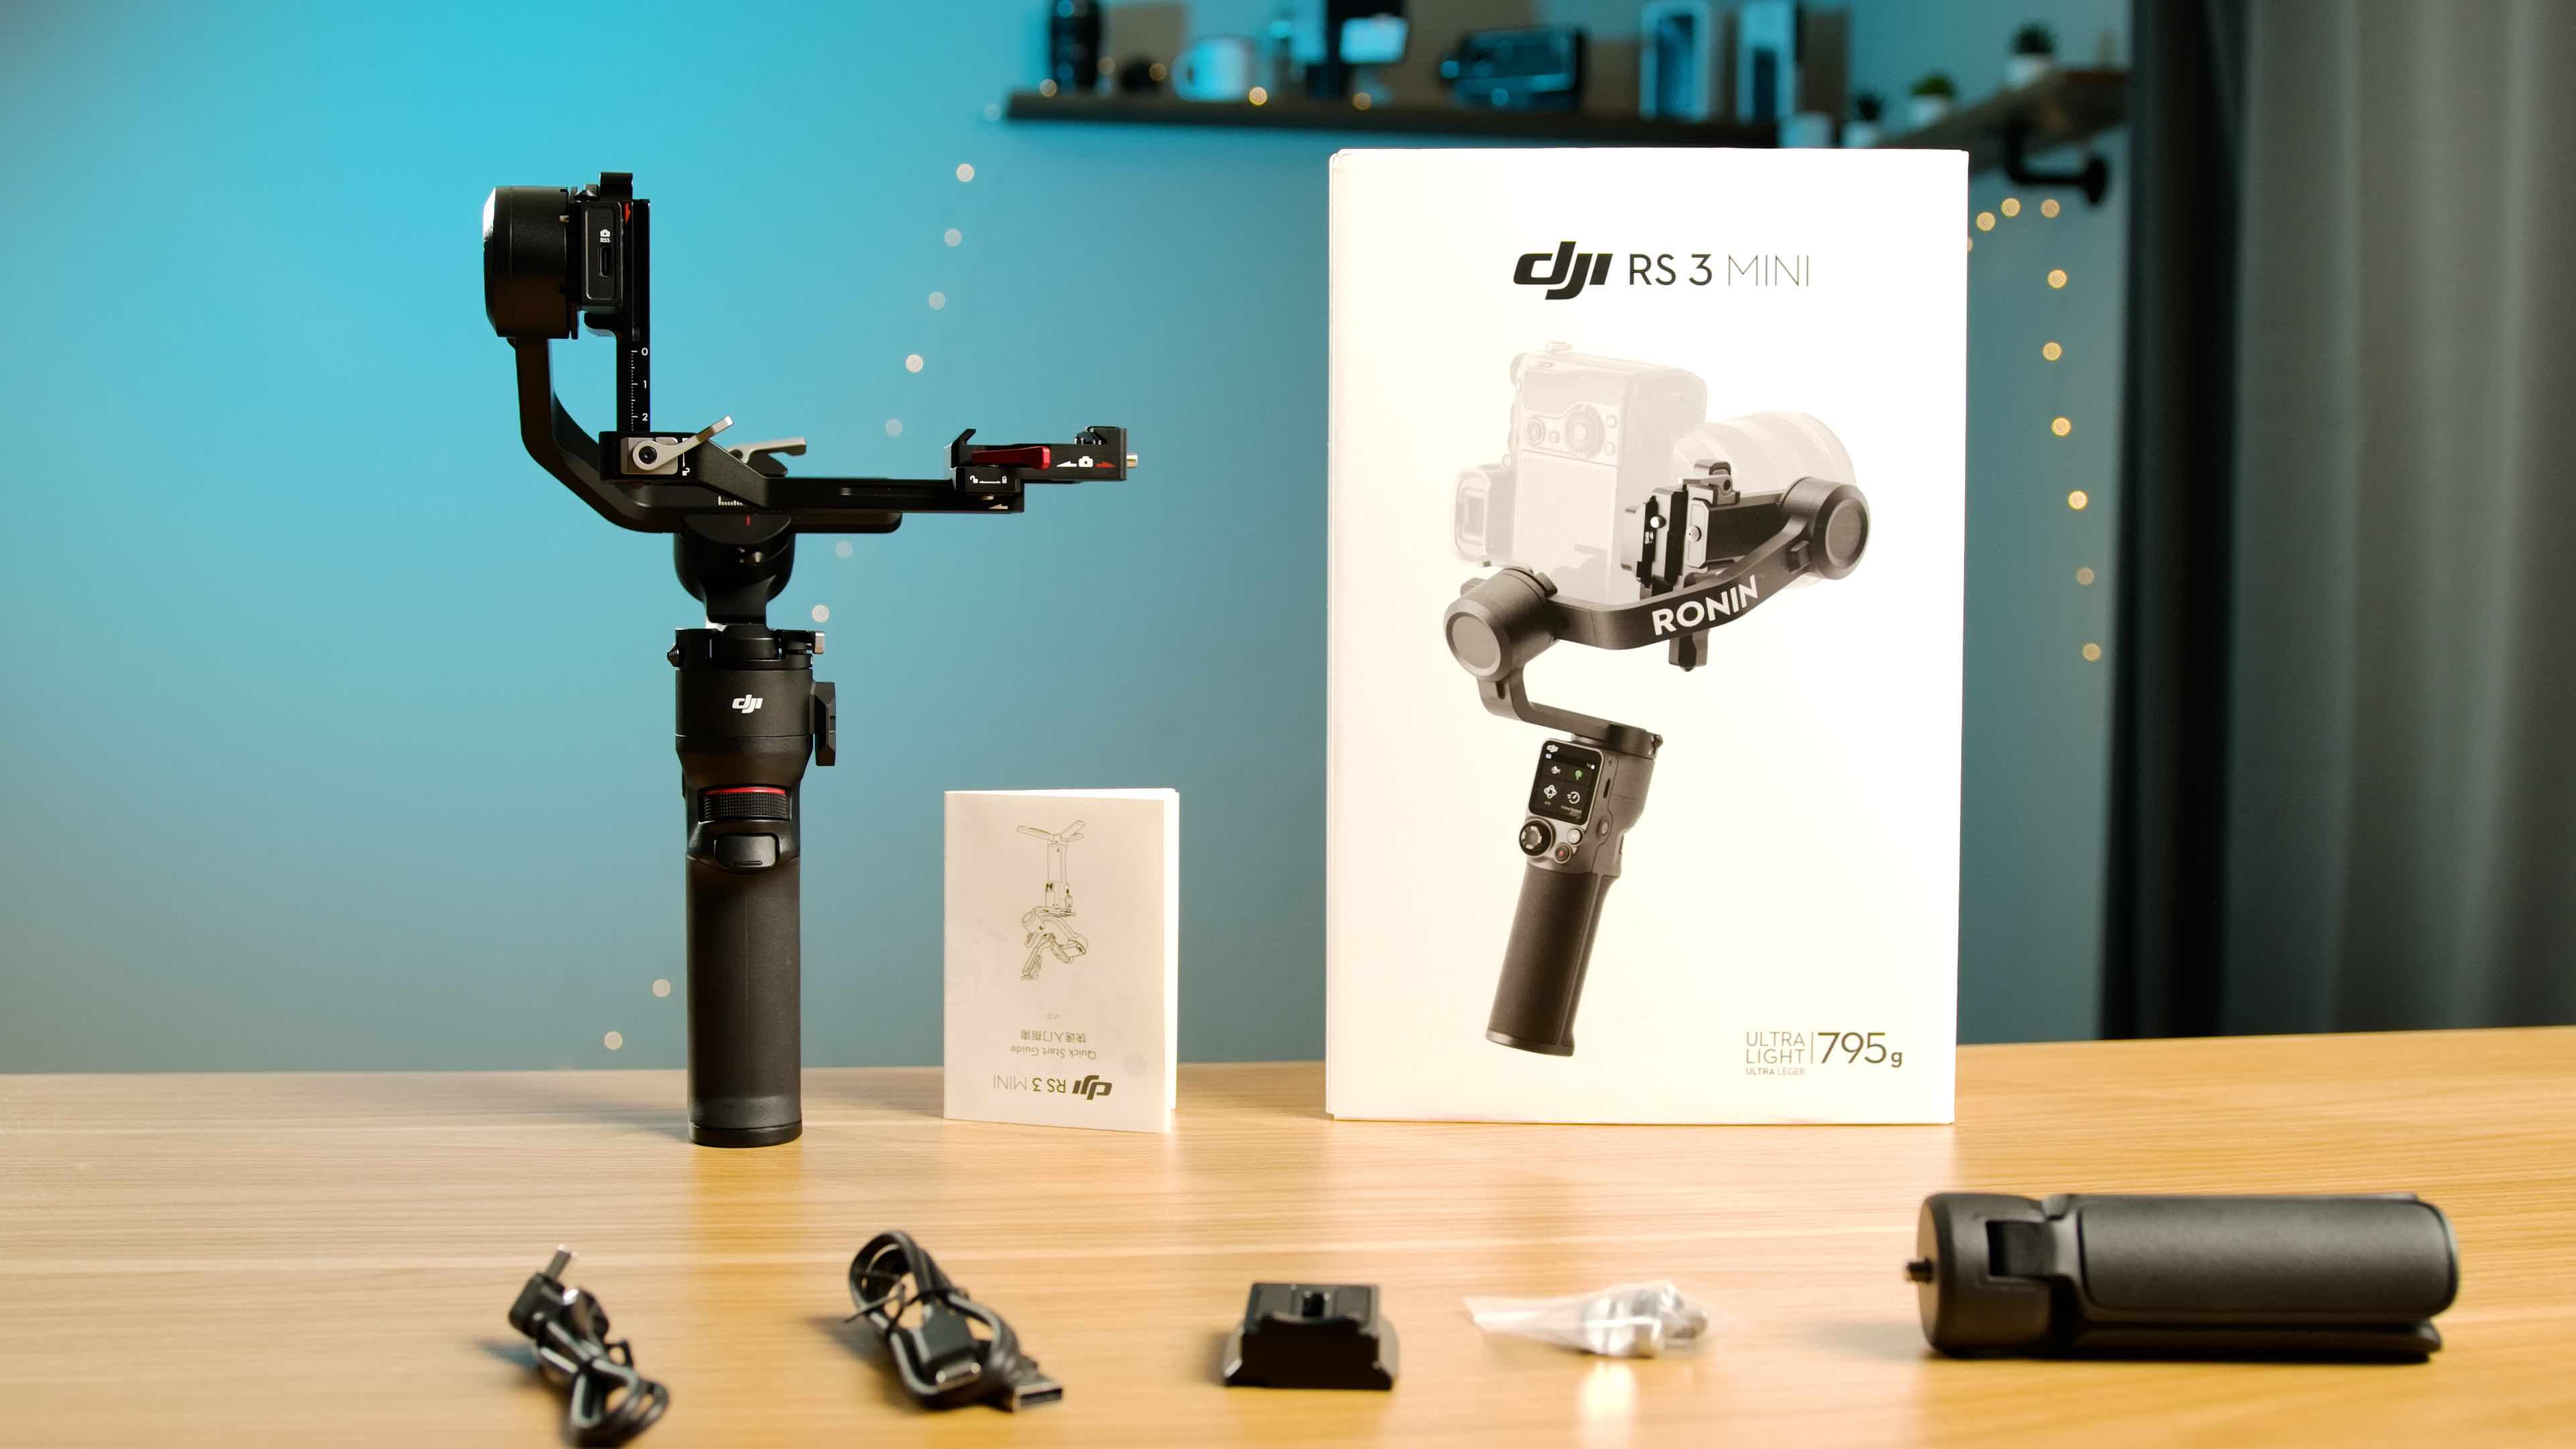 DJI RS 3 Mini hands-on and first impressions